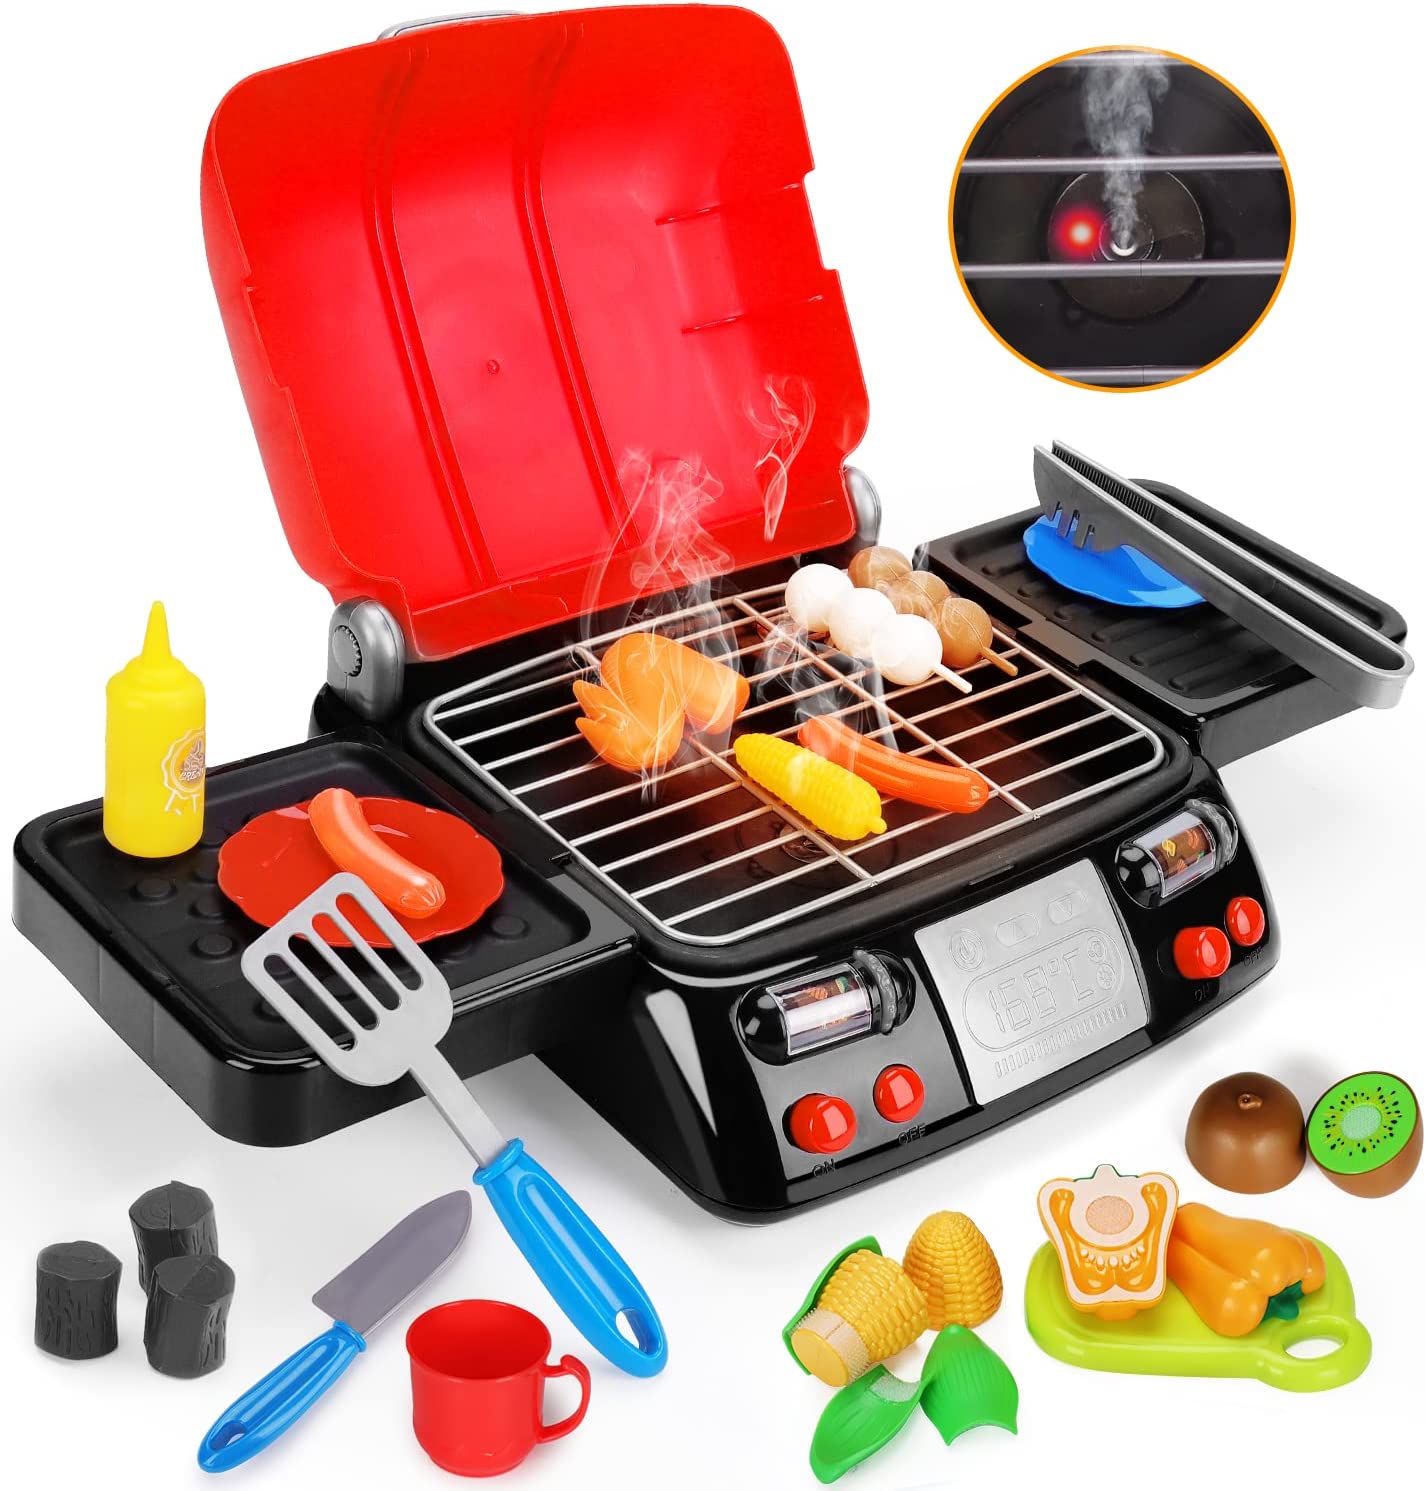 https://discounttoday.net/wp-content/uploads/2022/12/AugToy-Kids-Play-Food-Grill-with-Pretend-Smoke-Sound-Light-Kitchen-Playset-Pretend-BBQ-Accessories-Camping-Toy-Cooking-Set-Birthday-Outdoor-Toys-for-Toddlers-Children-Boys-Girls-Kid-Toy.jpg